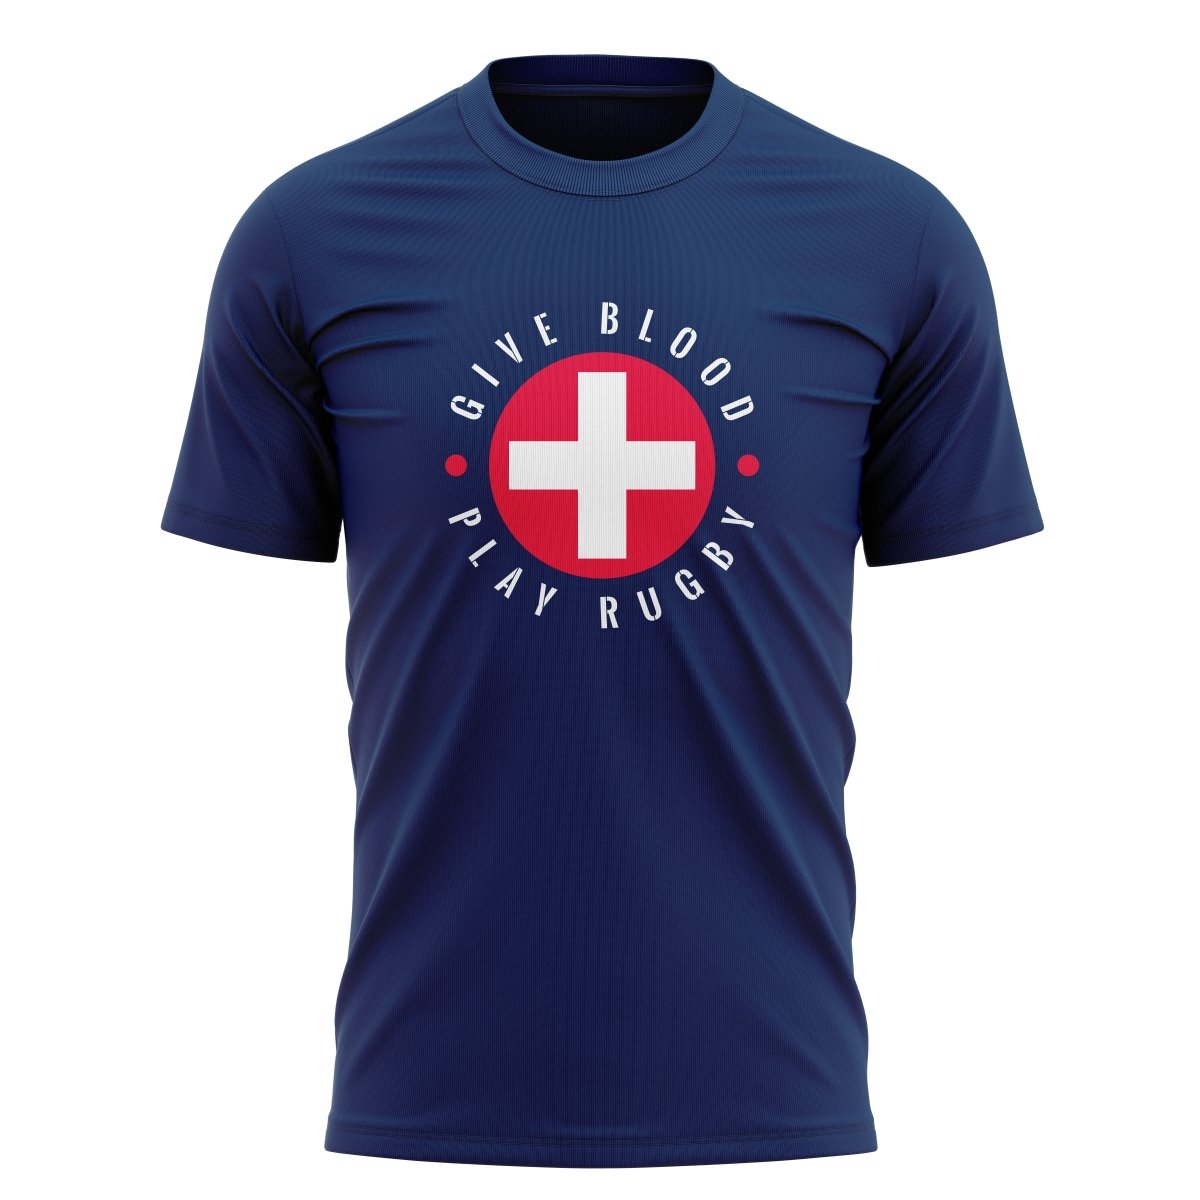 Give Blood PLAy Rugby Graphic Tee - www.therugbyshop.com www.therugbyshop.com MEN&#39;S / NAVY / S XIX Brands TEES Give Blood PLAy Rugby Graphic Tee